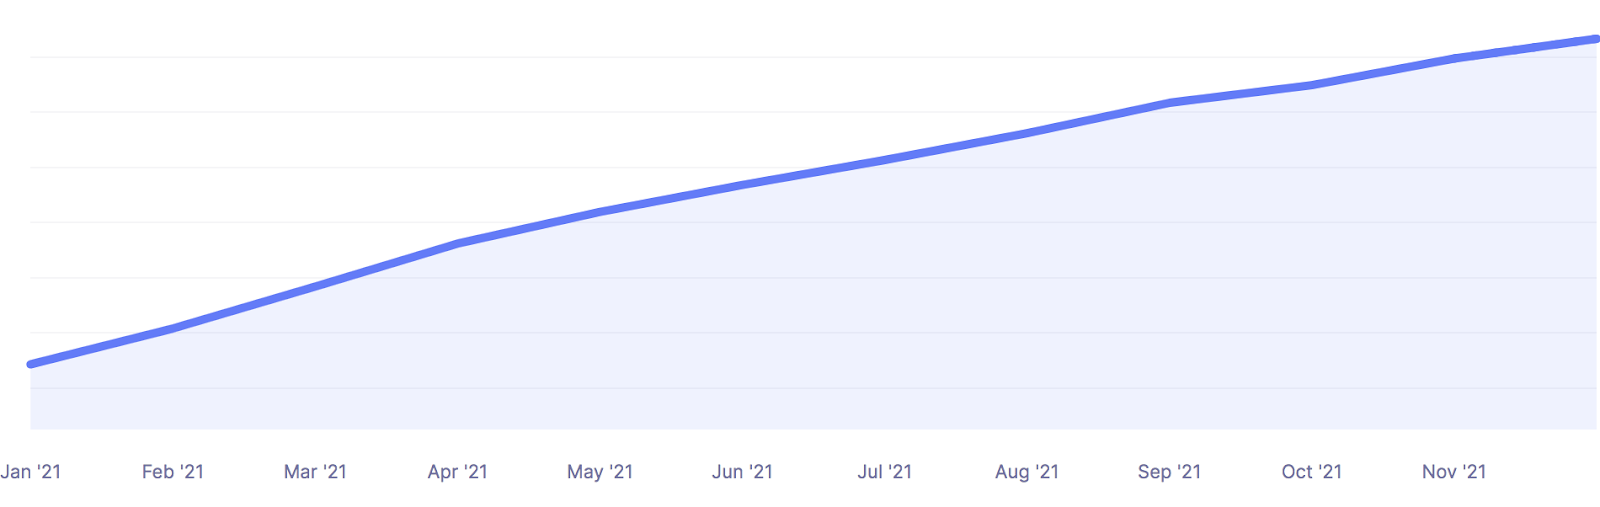 A blue line graph showing Kinsta's steady base growth from Jan '21 through Nov '21.